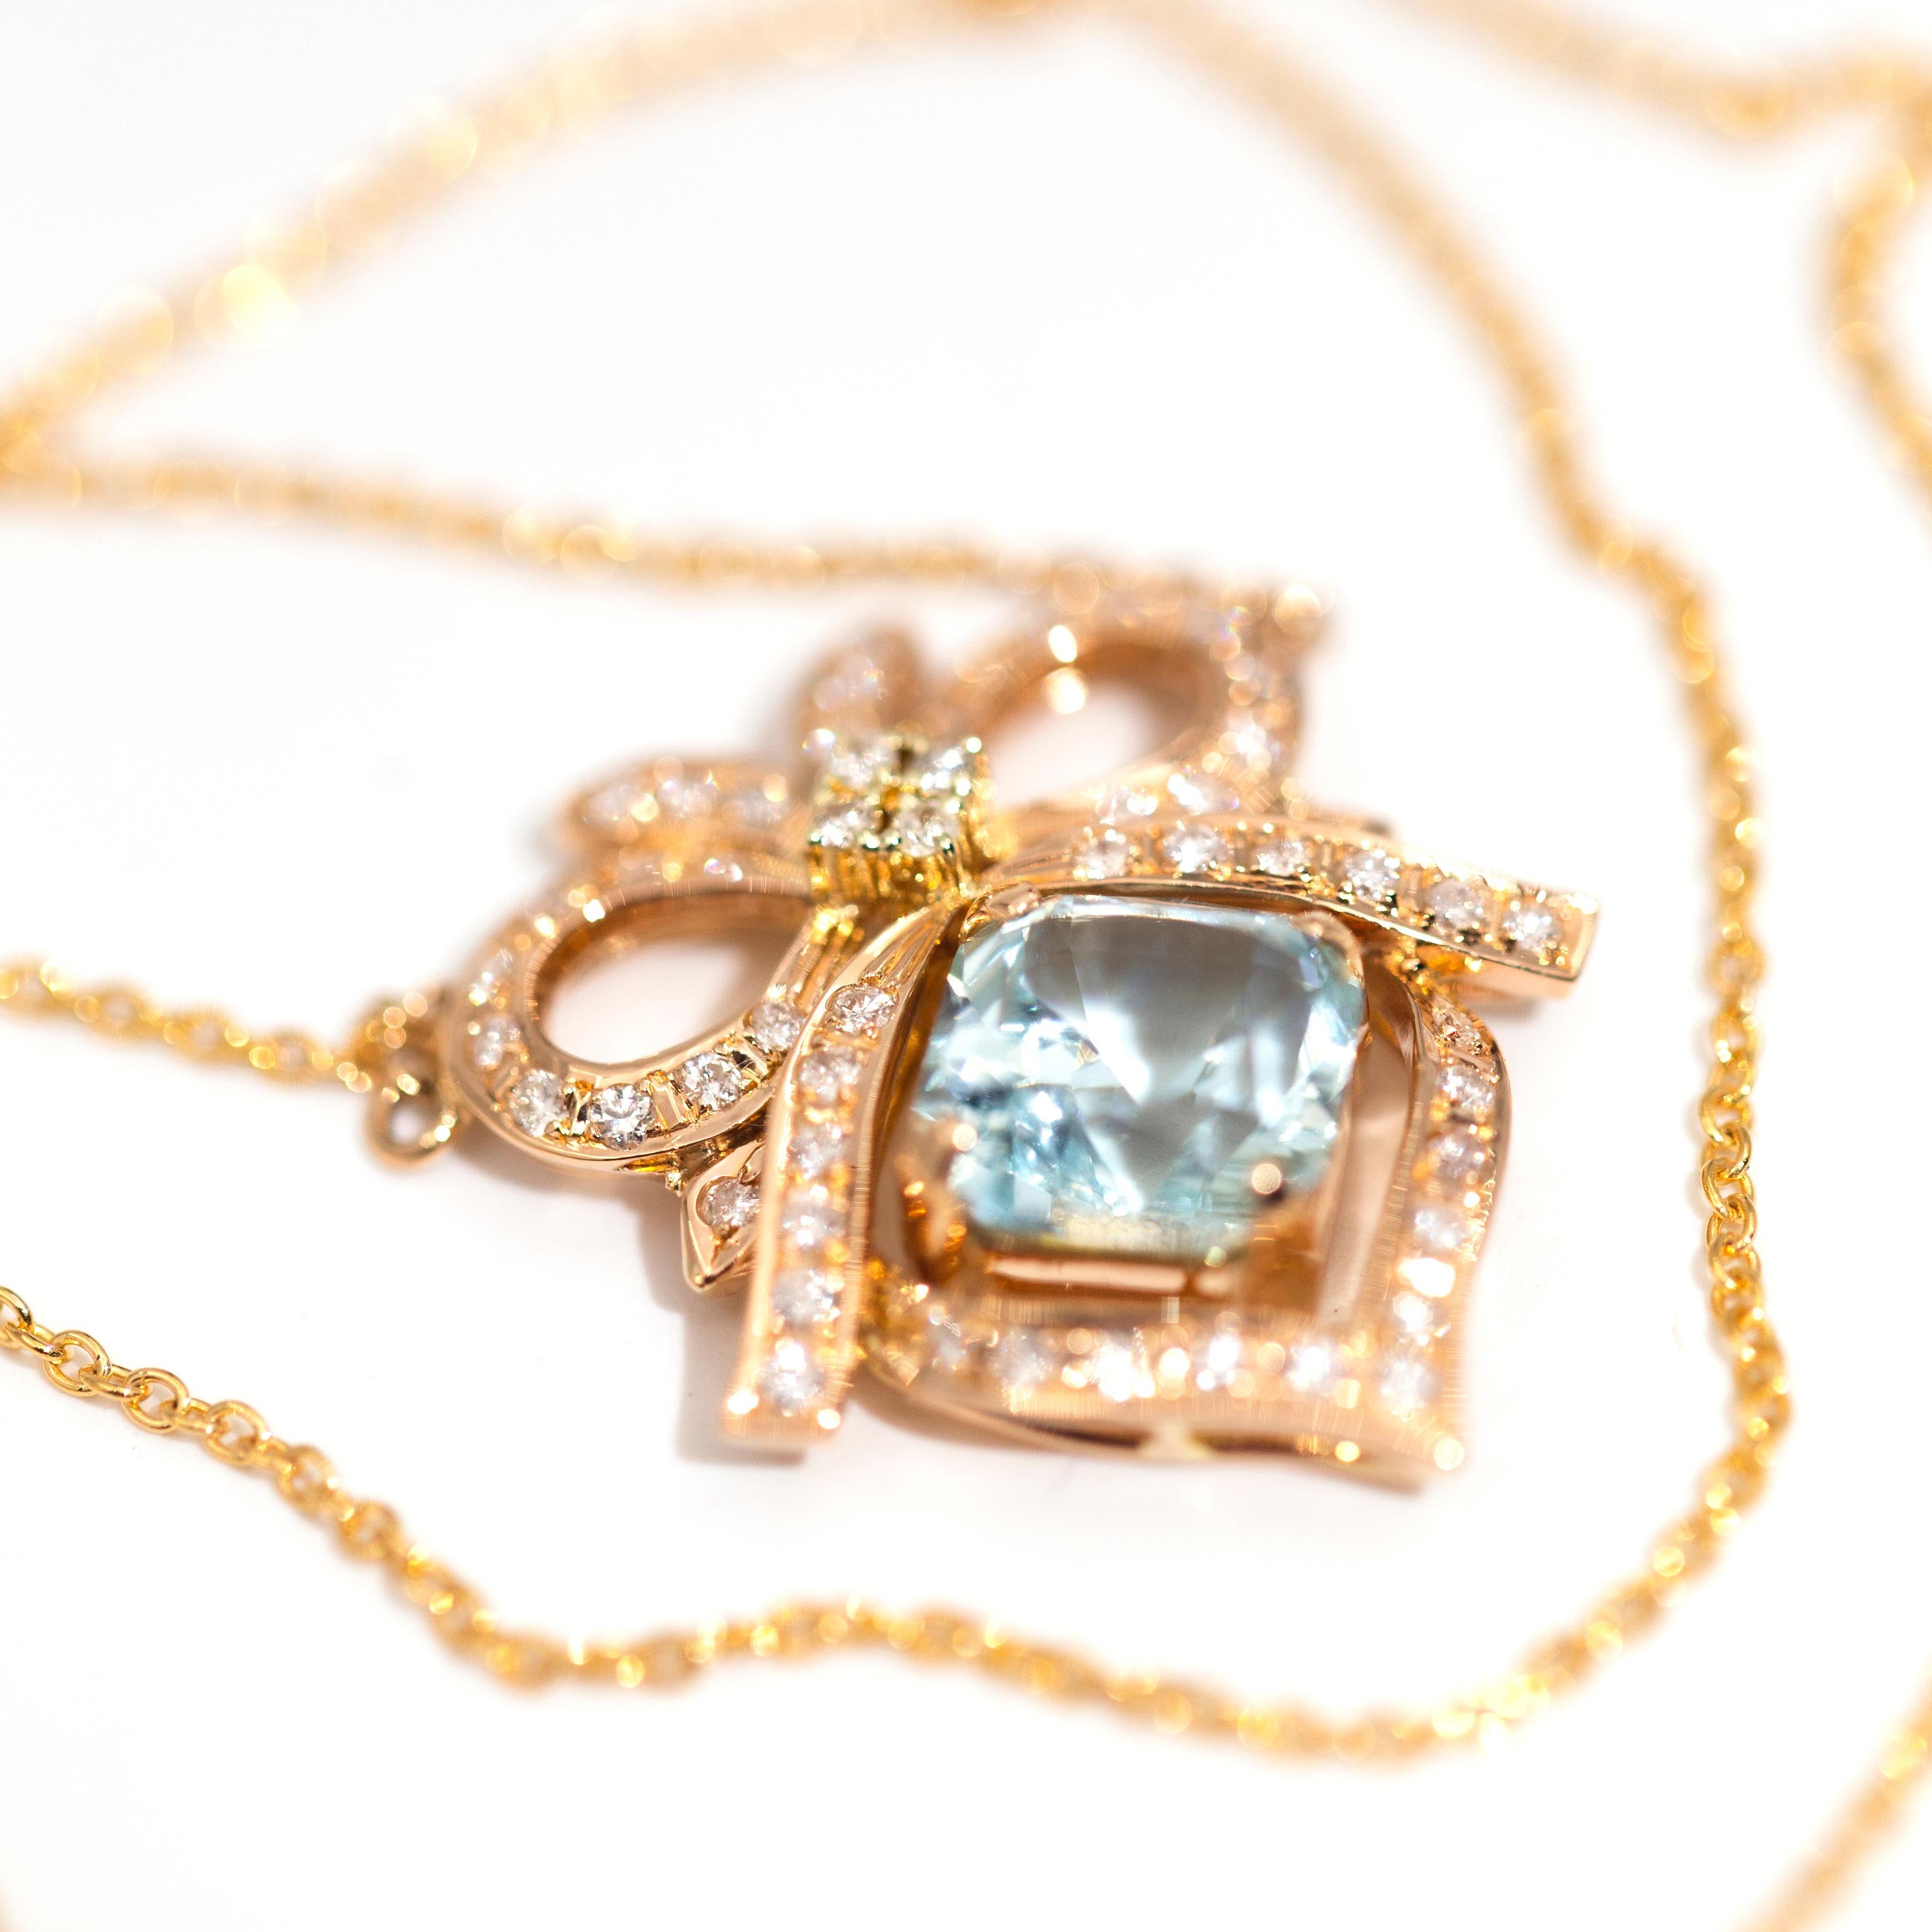 Modern Aquamarine and Diamond Vintage 14 Carat Gold Necklet with 9 Carat Gold Chain